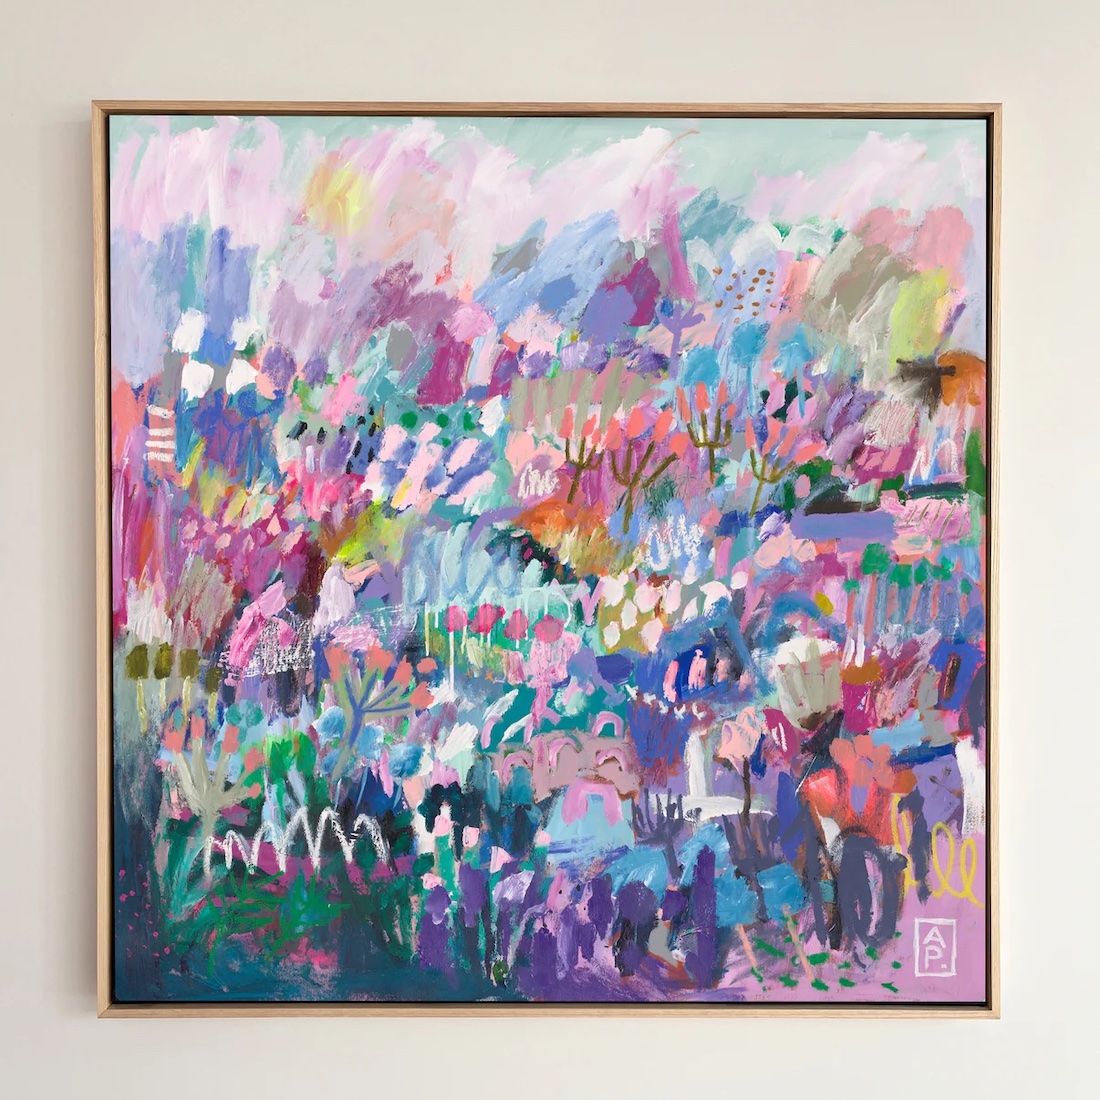 Colourful rainbow abstract artwork called Self Raising Flower 2 by Anna Price